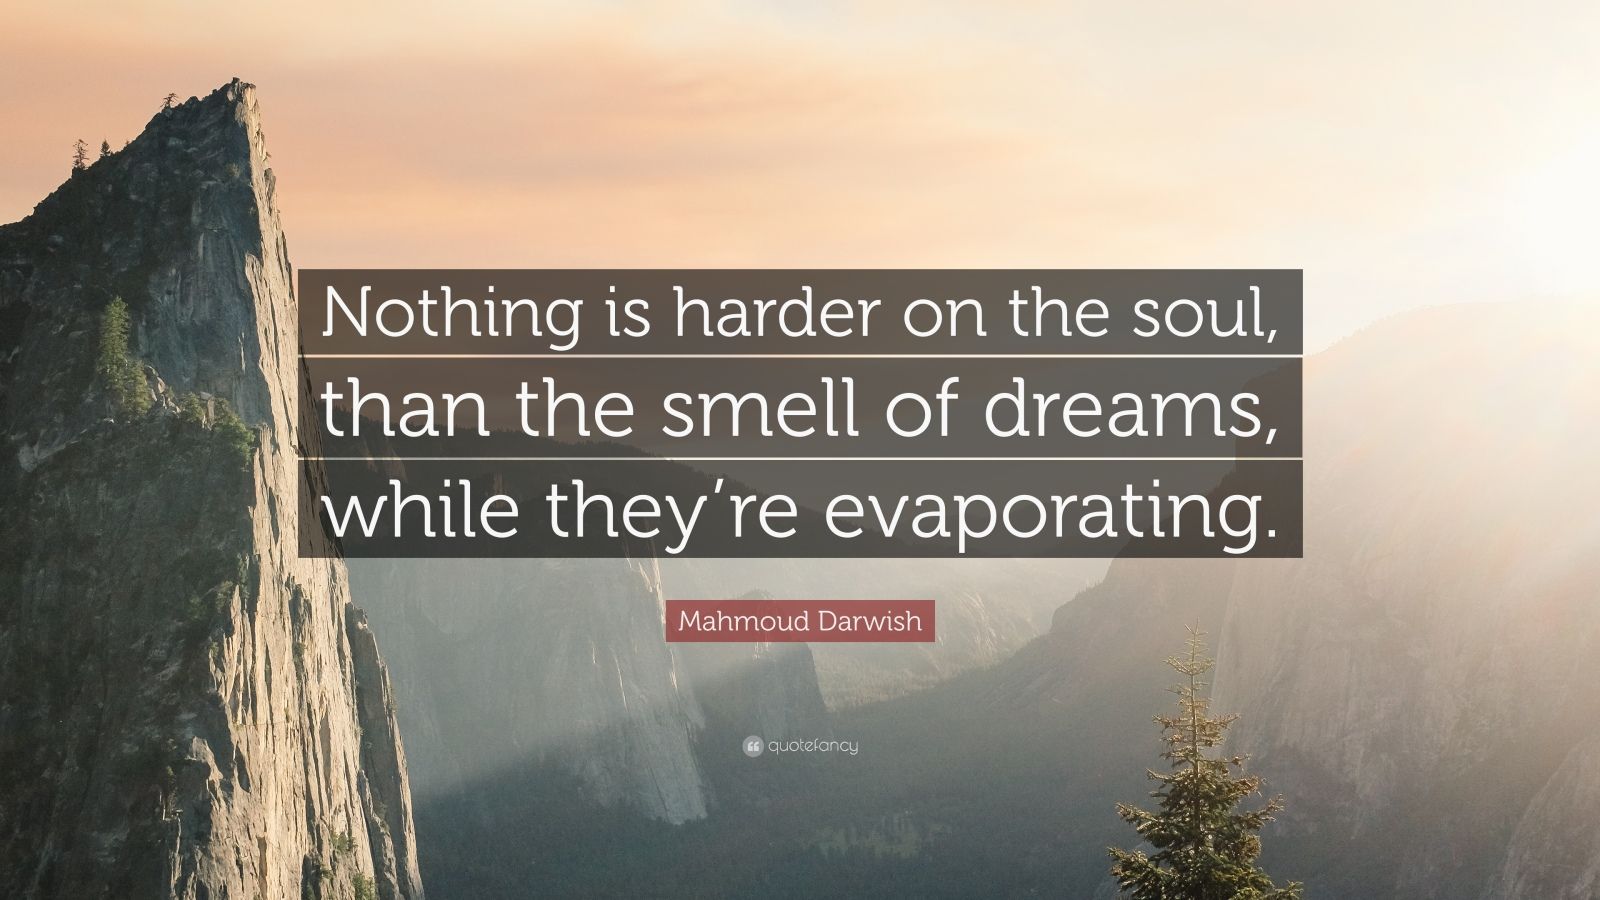 Mahmoud Darwish Quote: “Nothing is harder on the soul, than the smell